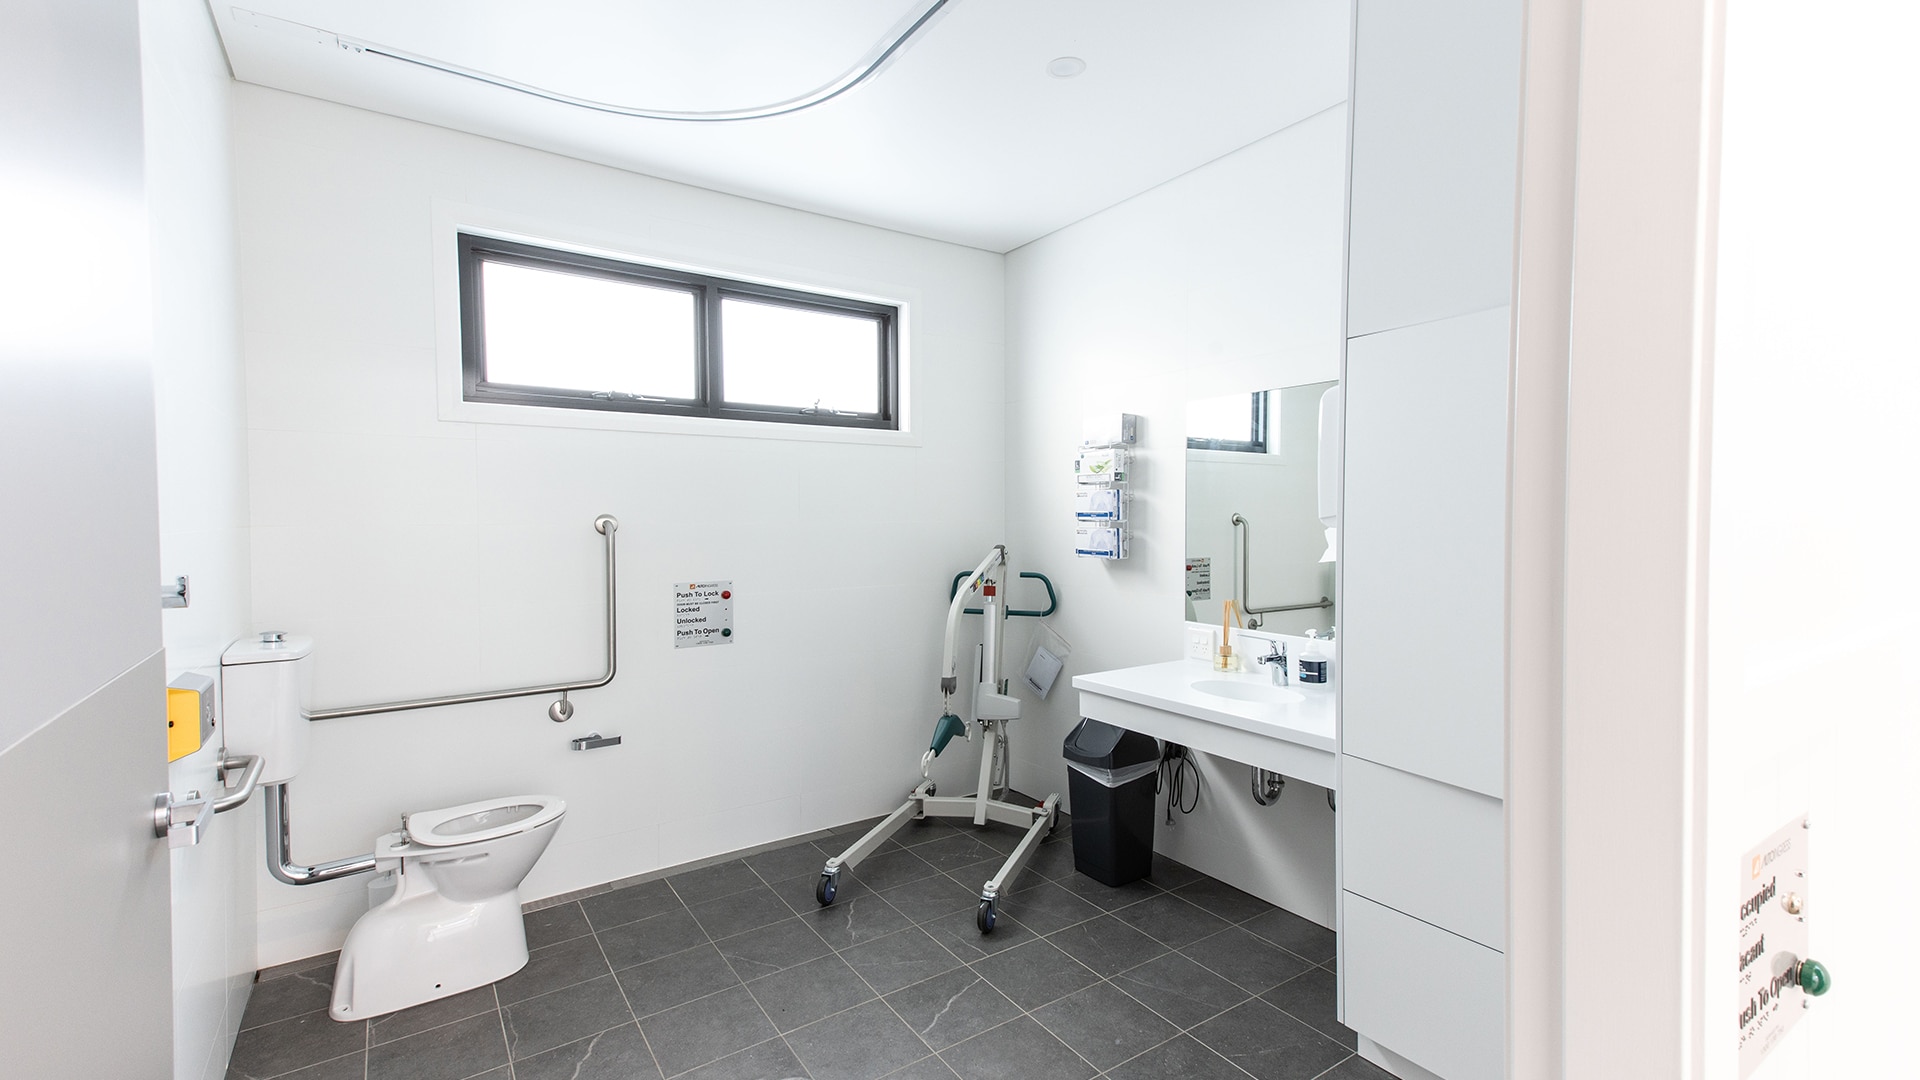 A bathroom with toilet underneath two windows, mobility devices and a sink area.